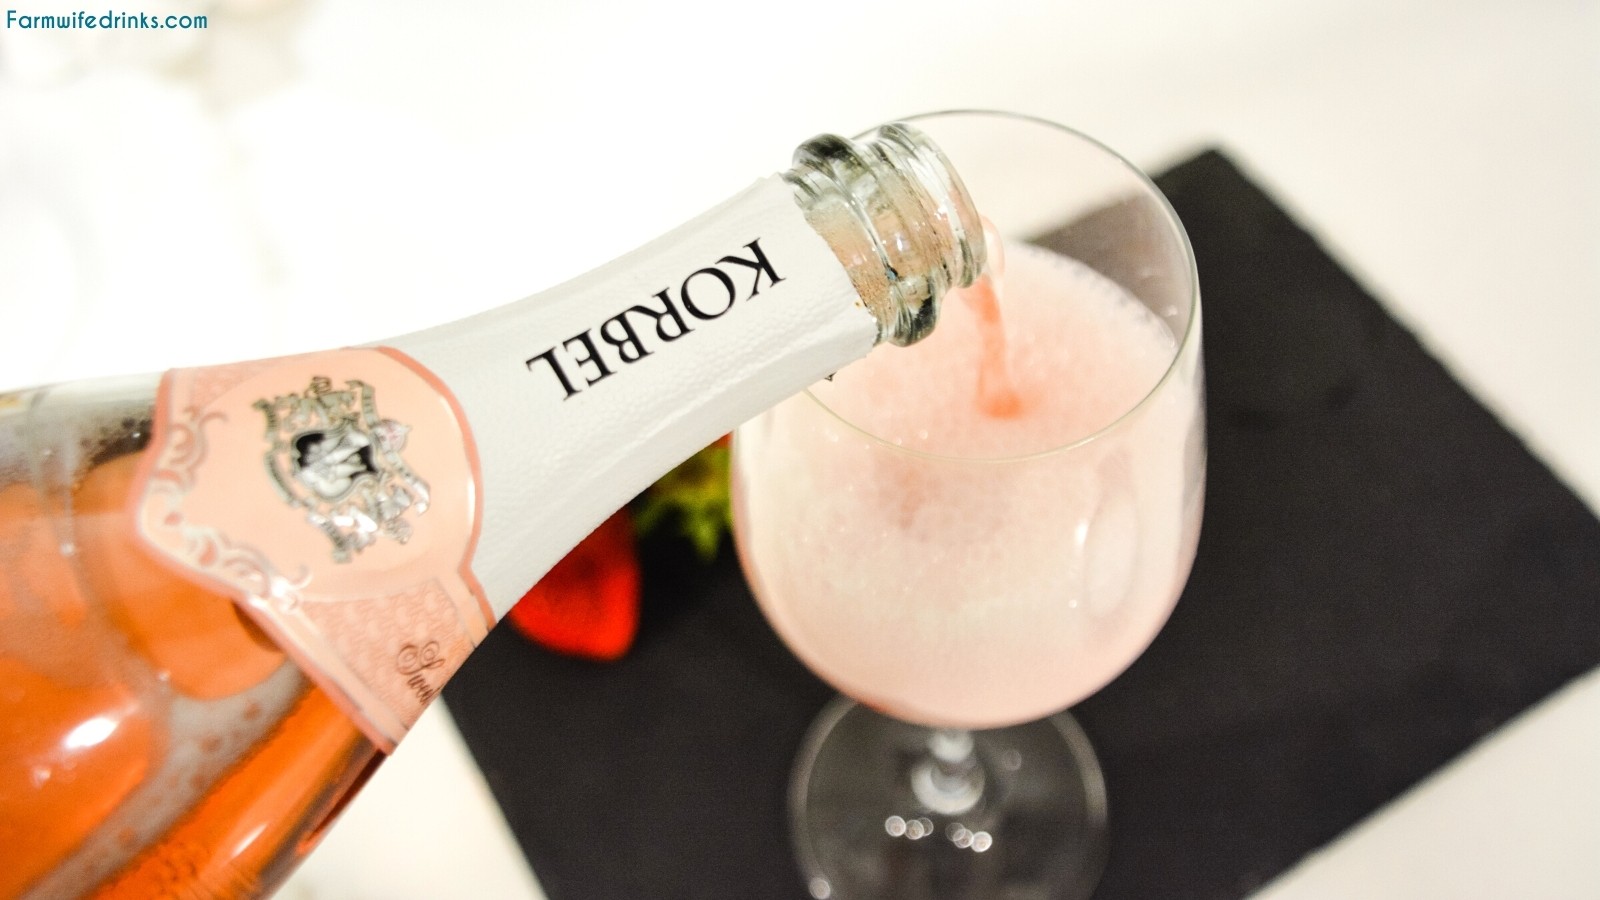 Rosé and Cream Floats combine two amazing items - rosé wine and ice cream for a frozen wine treat that is perfect as a dessert, after-dinner drink, or poolside cocktail.